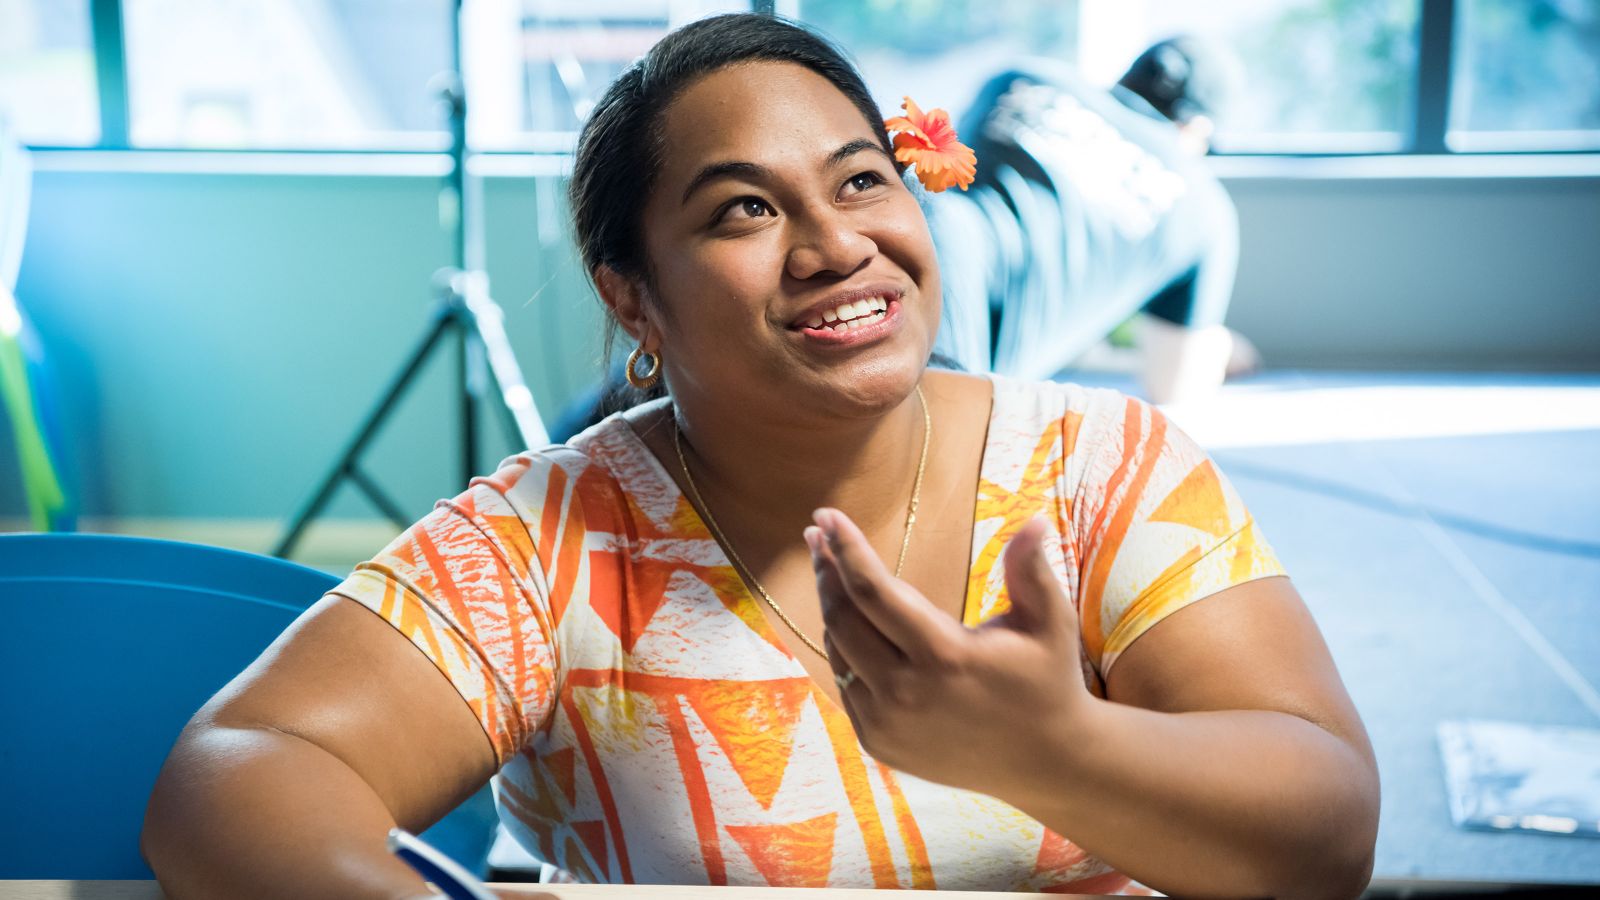 Scholarship – a pasifika woman smiles wearing an orange dress and an organge flower in her hair.